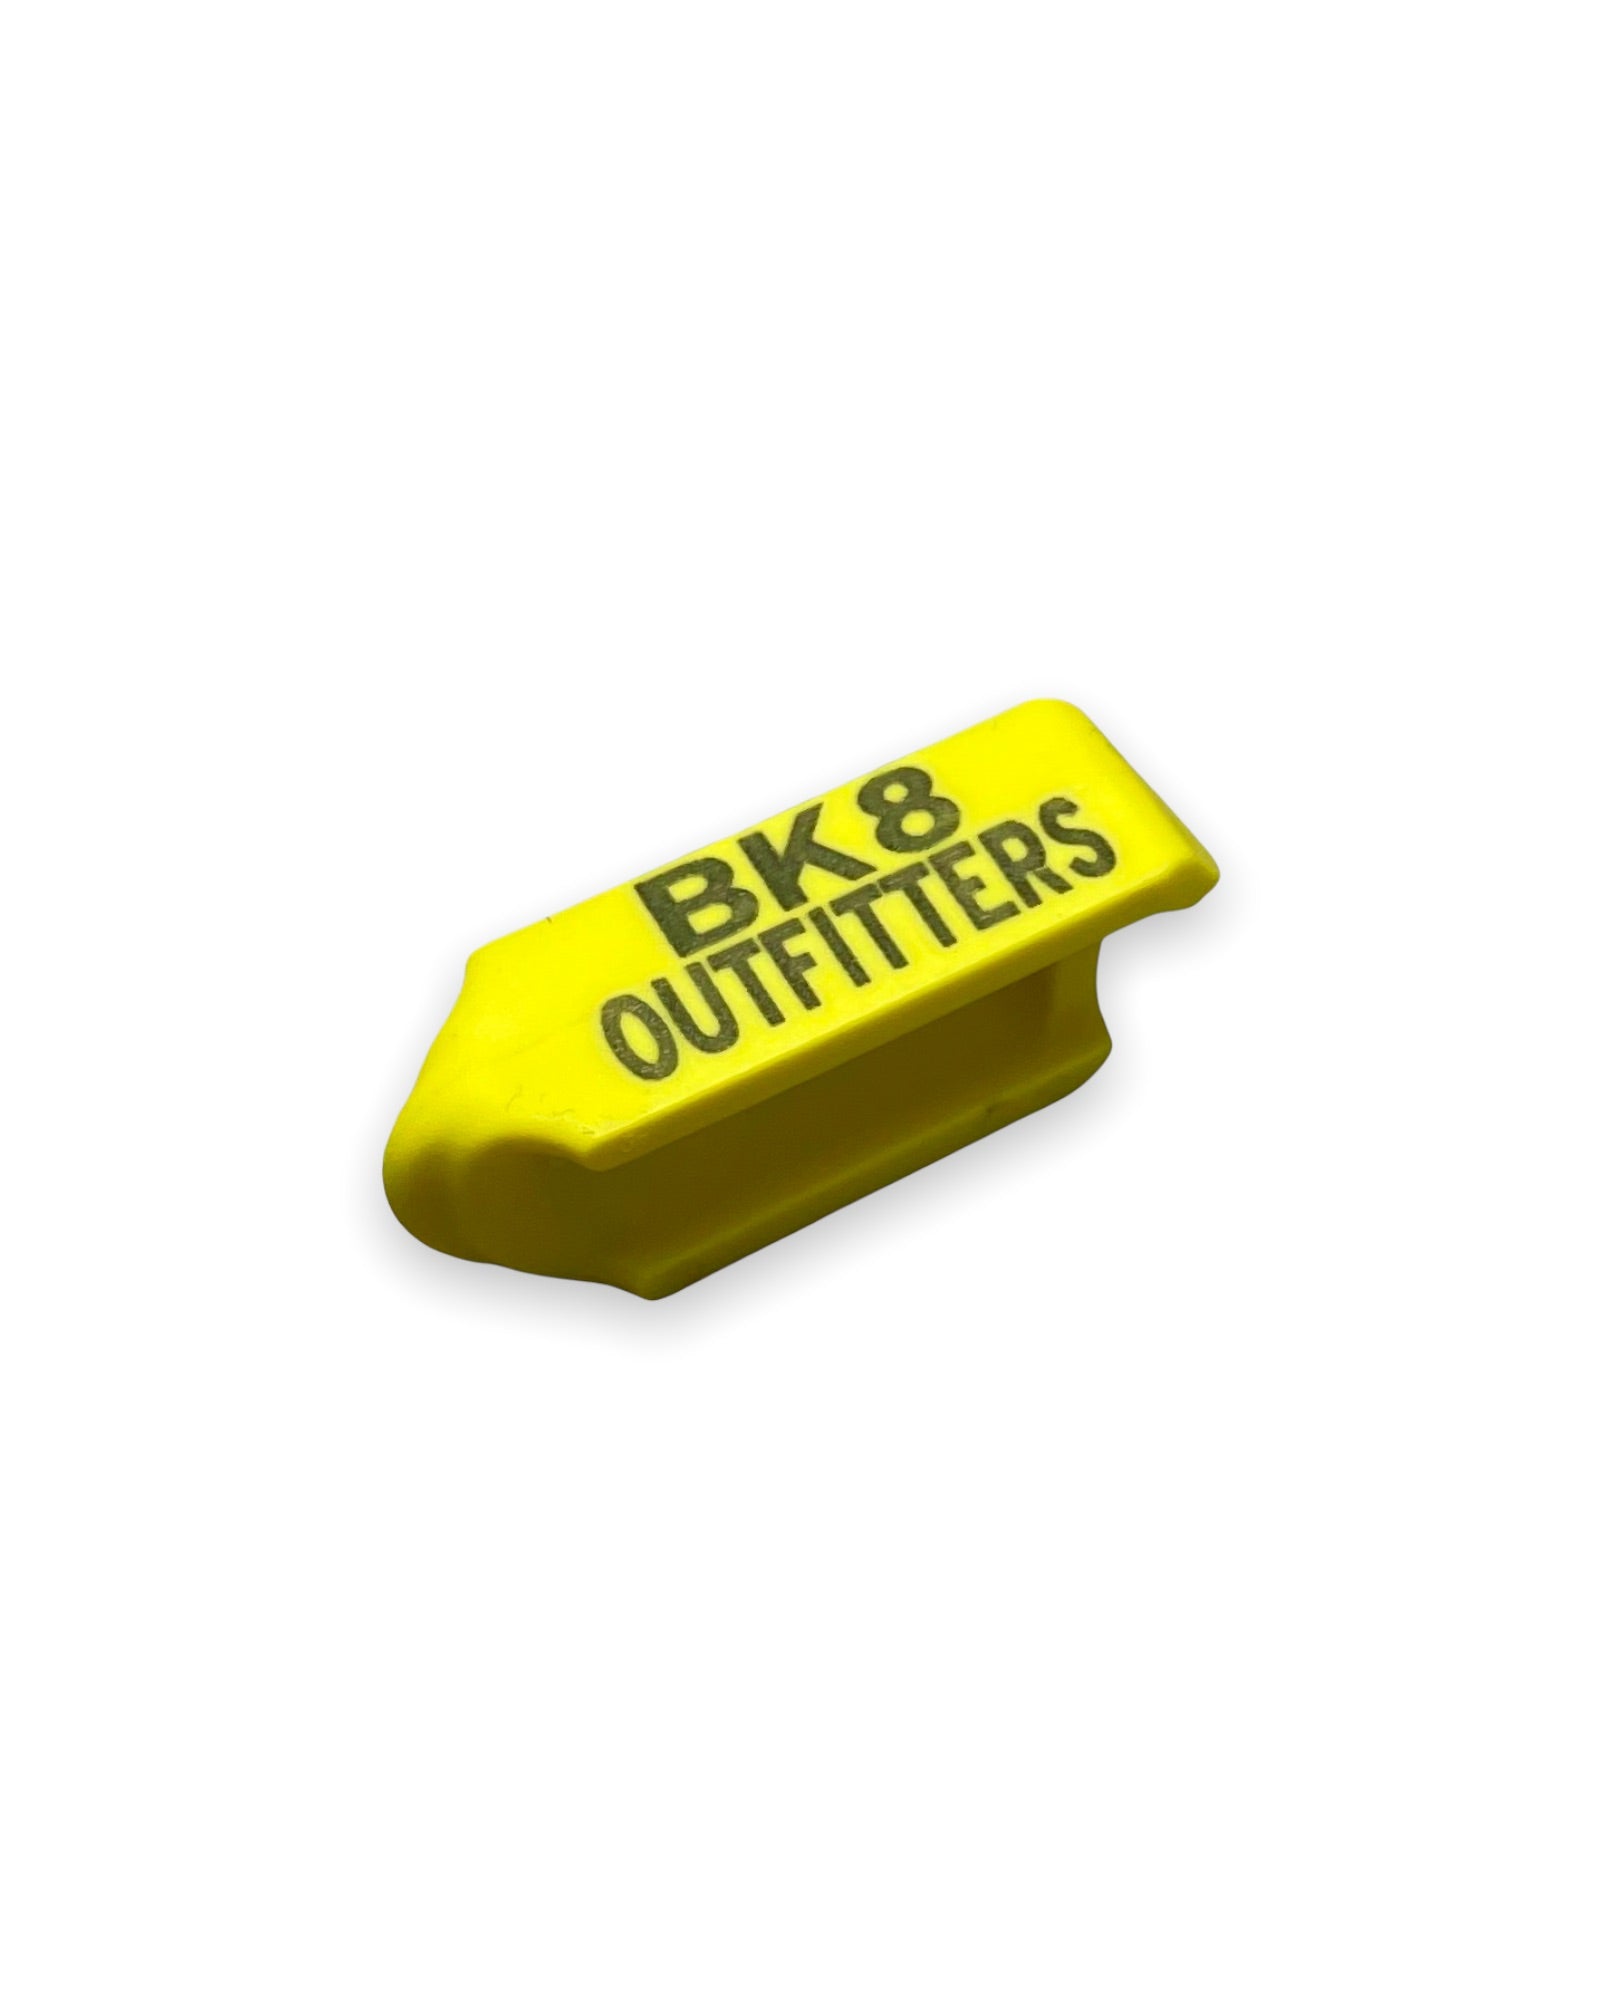 Sheep Tag | BK8 Outfitters | 2021 Yellow